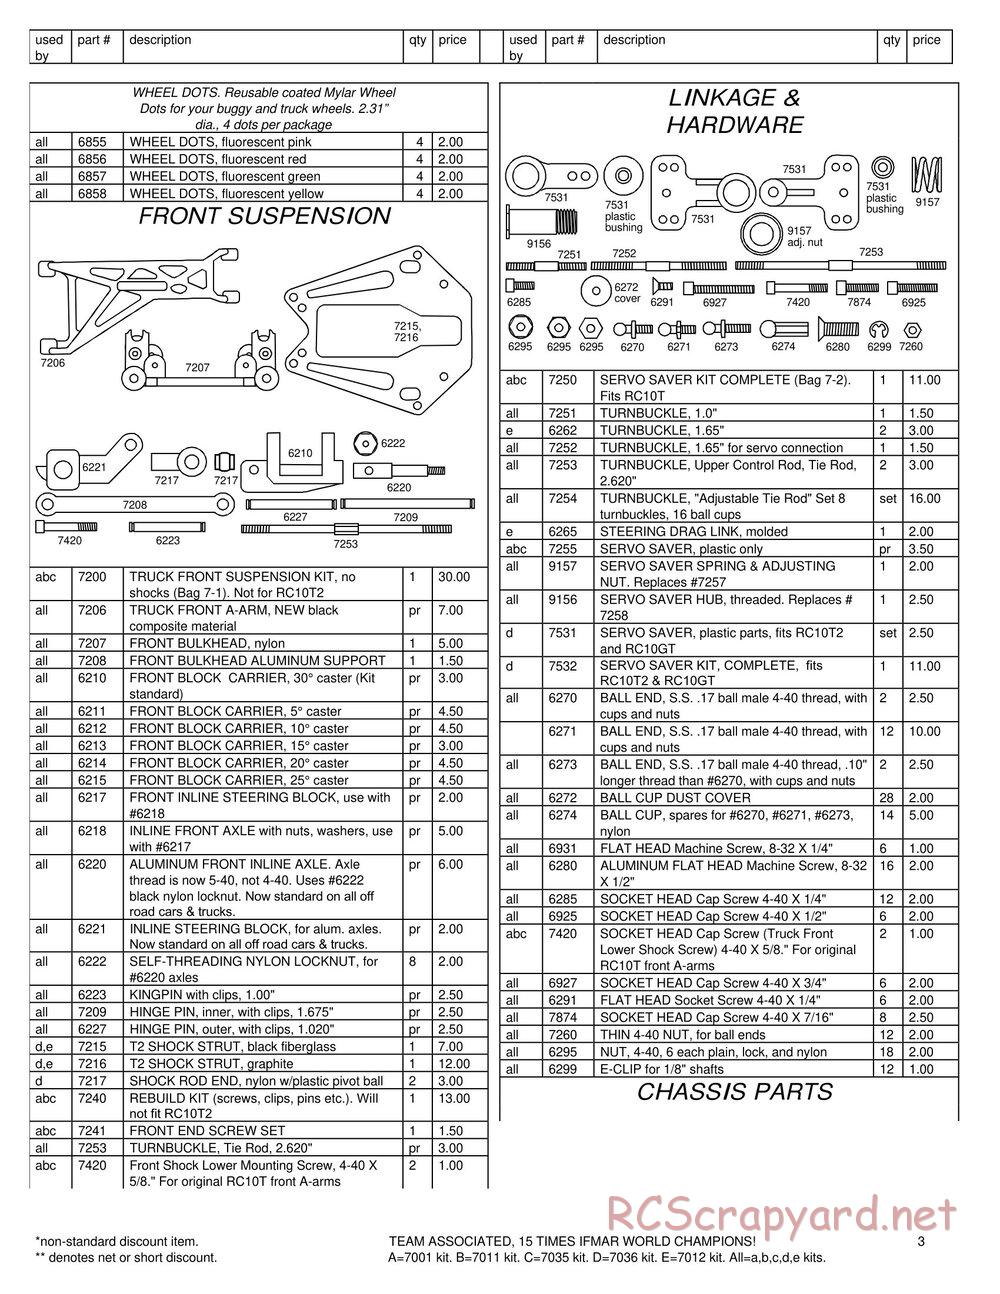 Team Associated - RC10T2 - Parts - Page 2